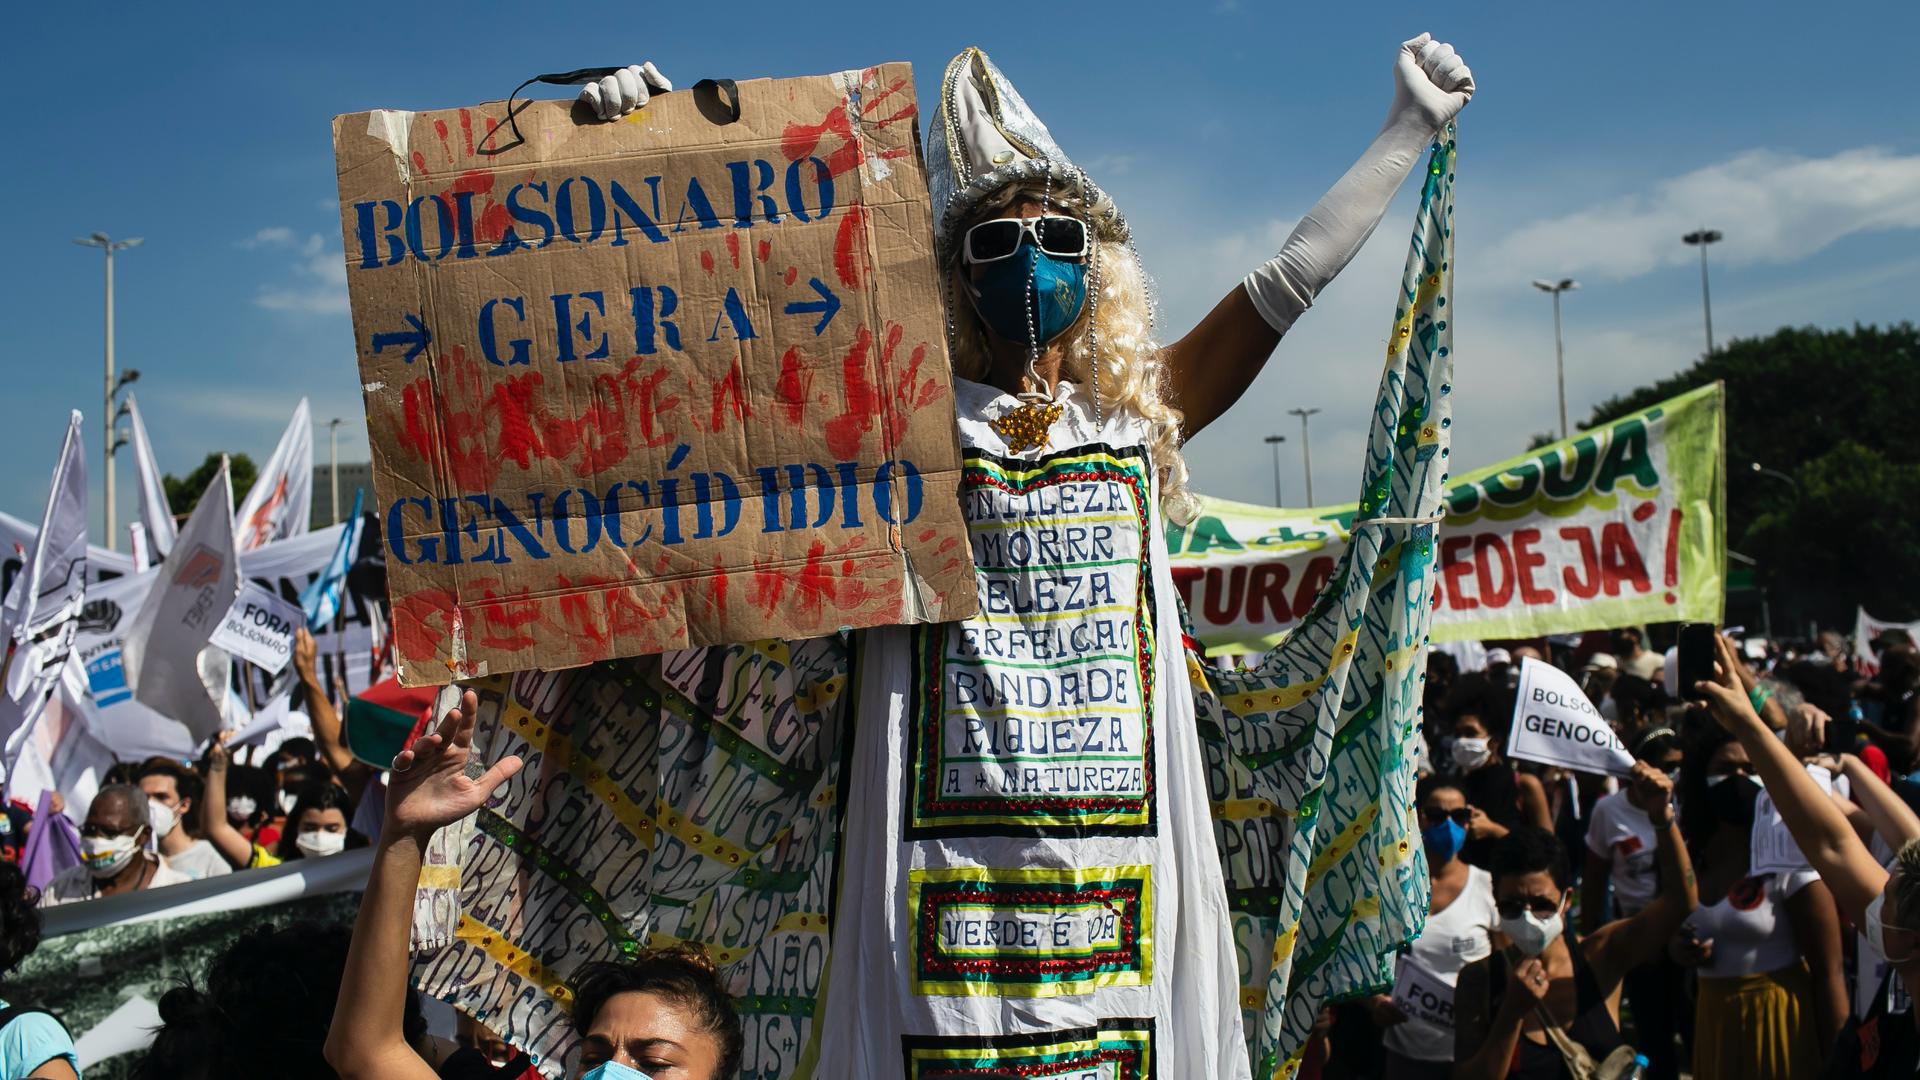 A man walking on stilts holds a sign with a message that reads in Portuguese: "Bolsonaro generates genocide"